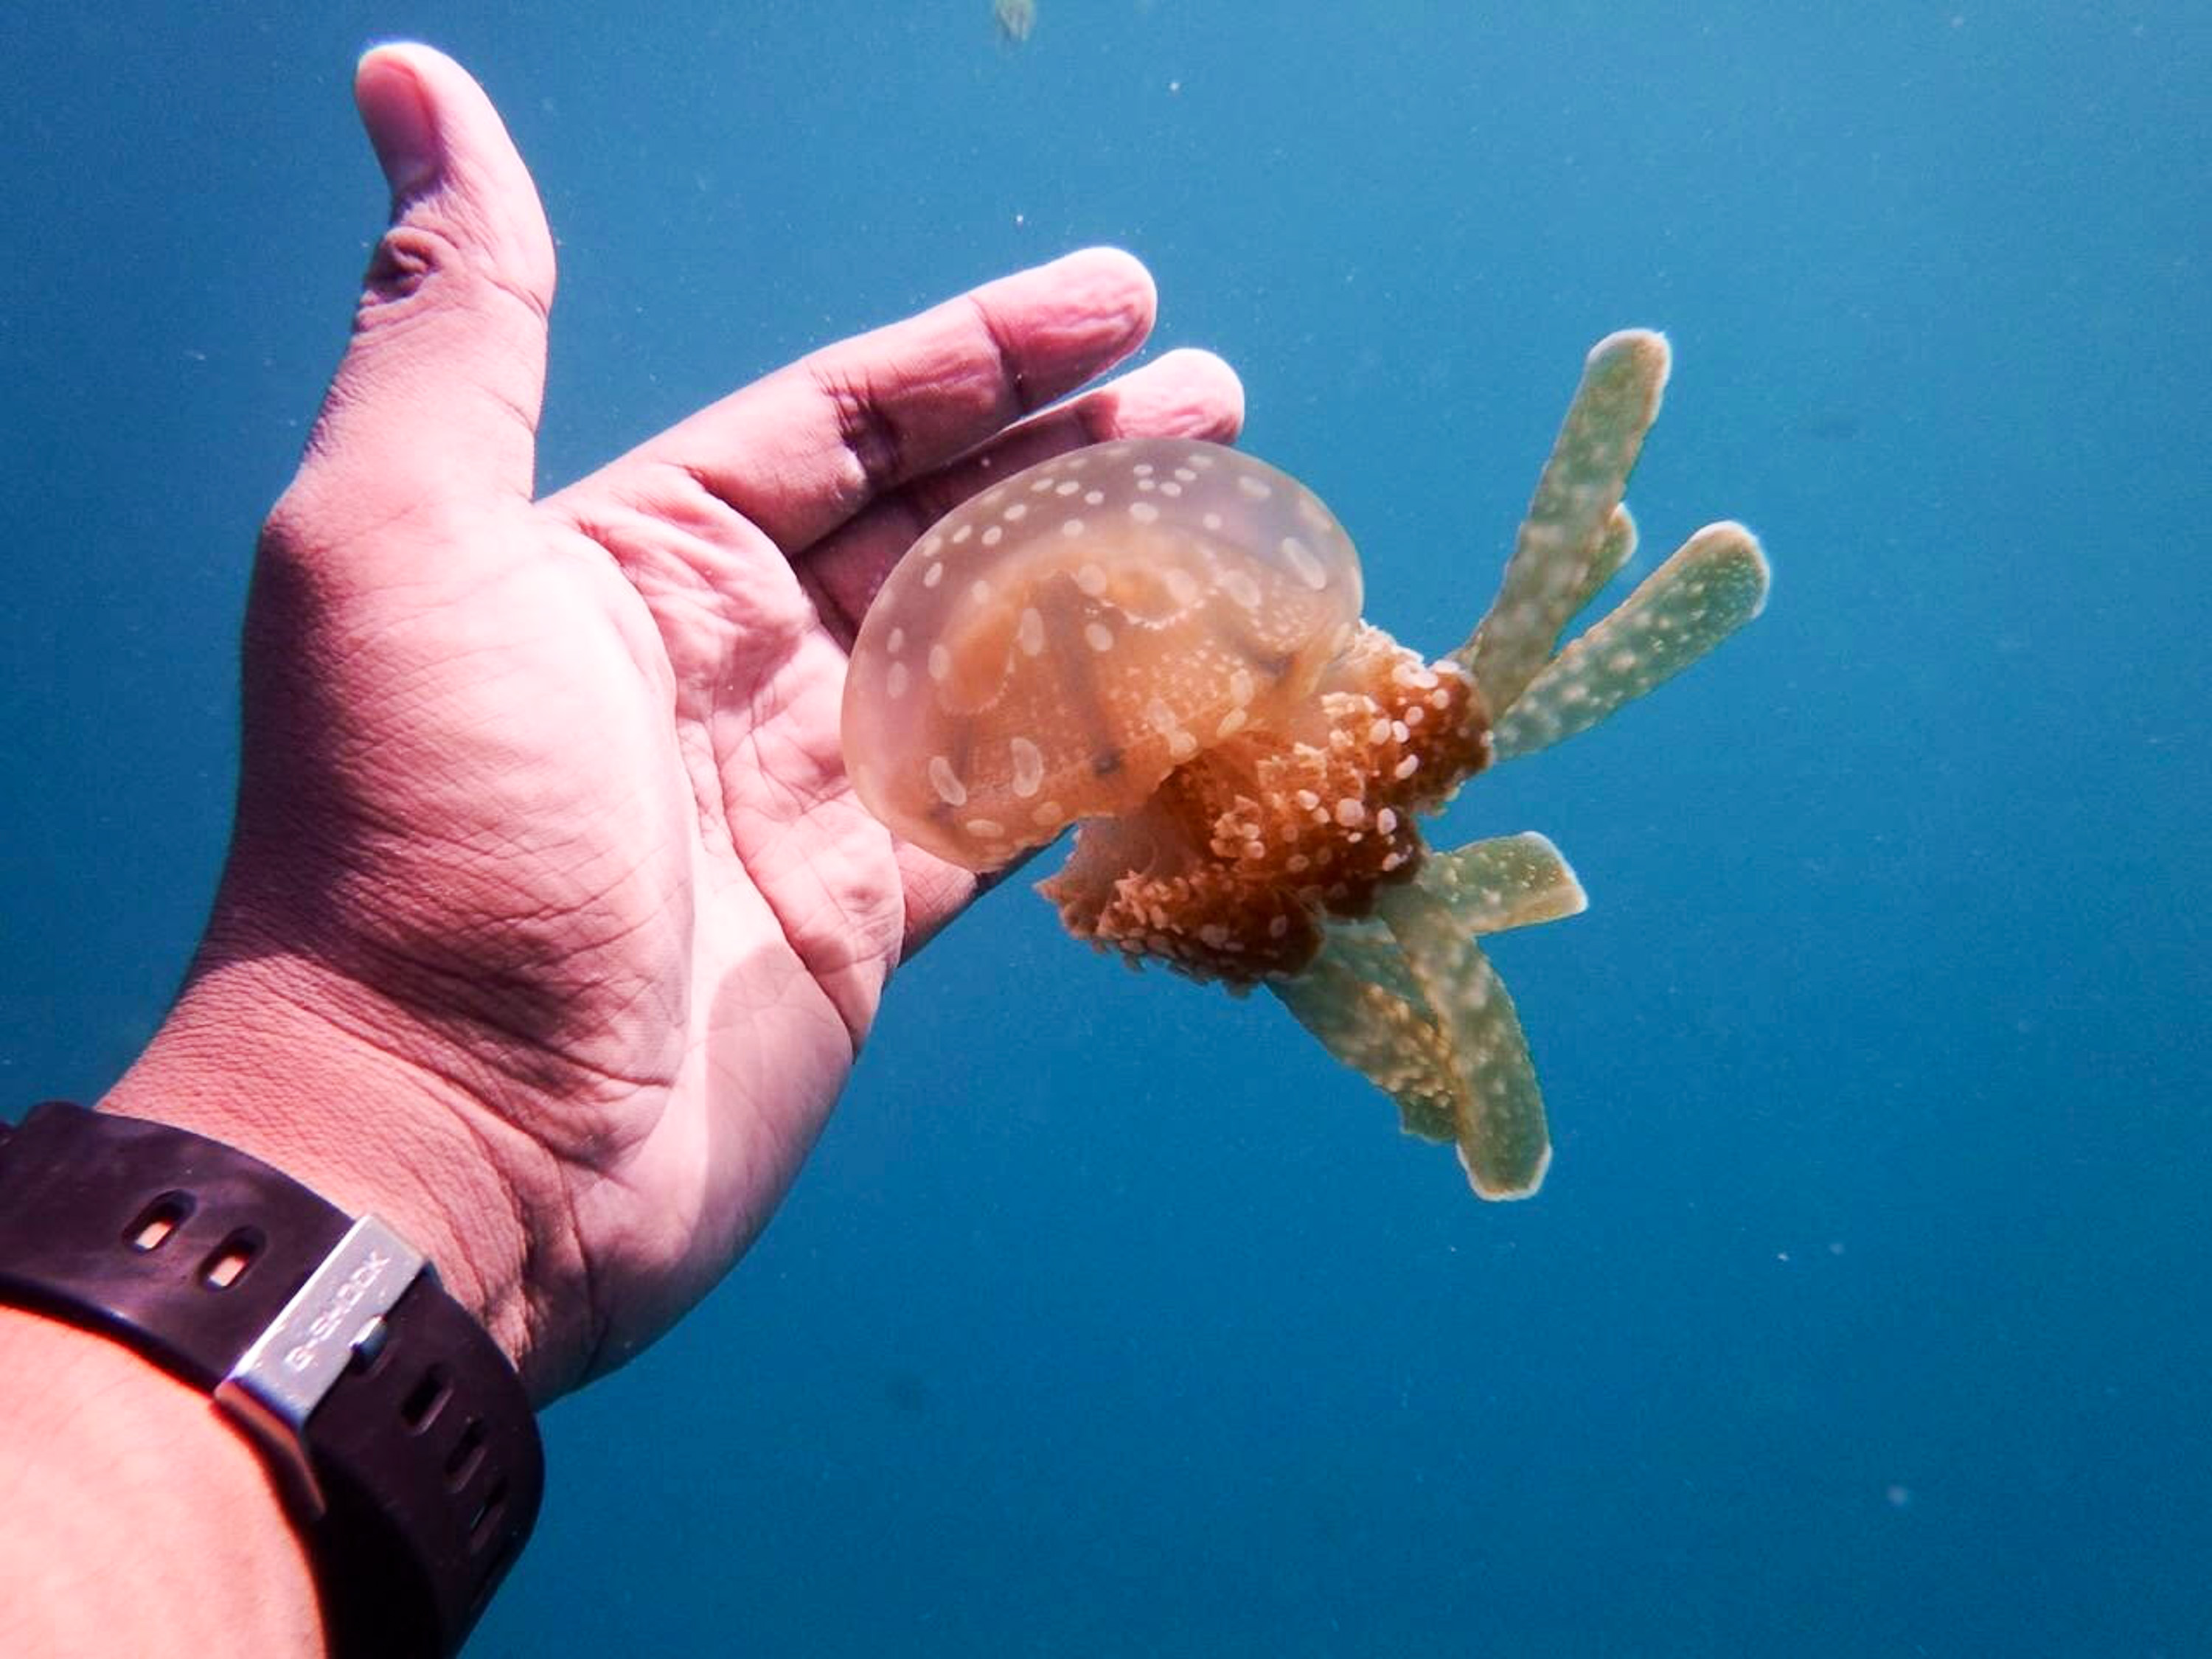 ONE OF A KIND. A stingless jellyfish at Sohoton Cove National Park. Photo by Jefferson Balon  